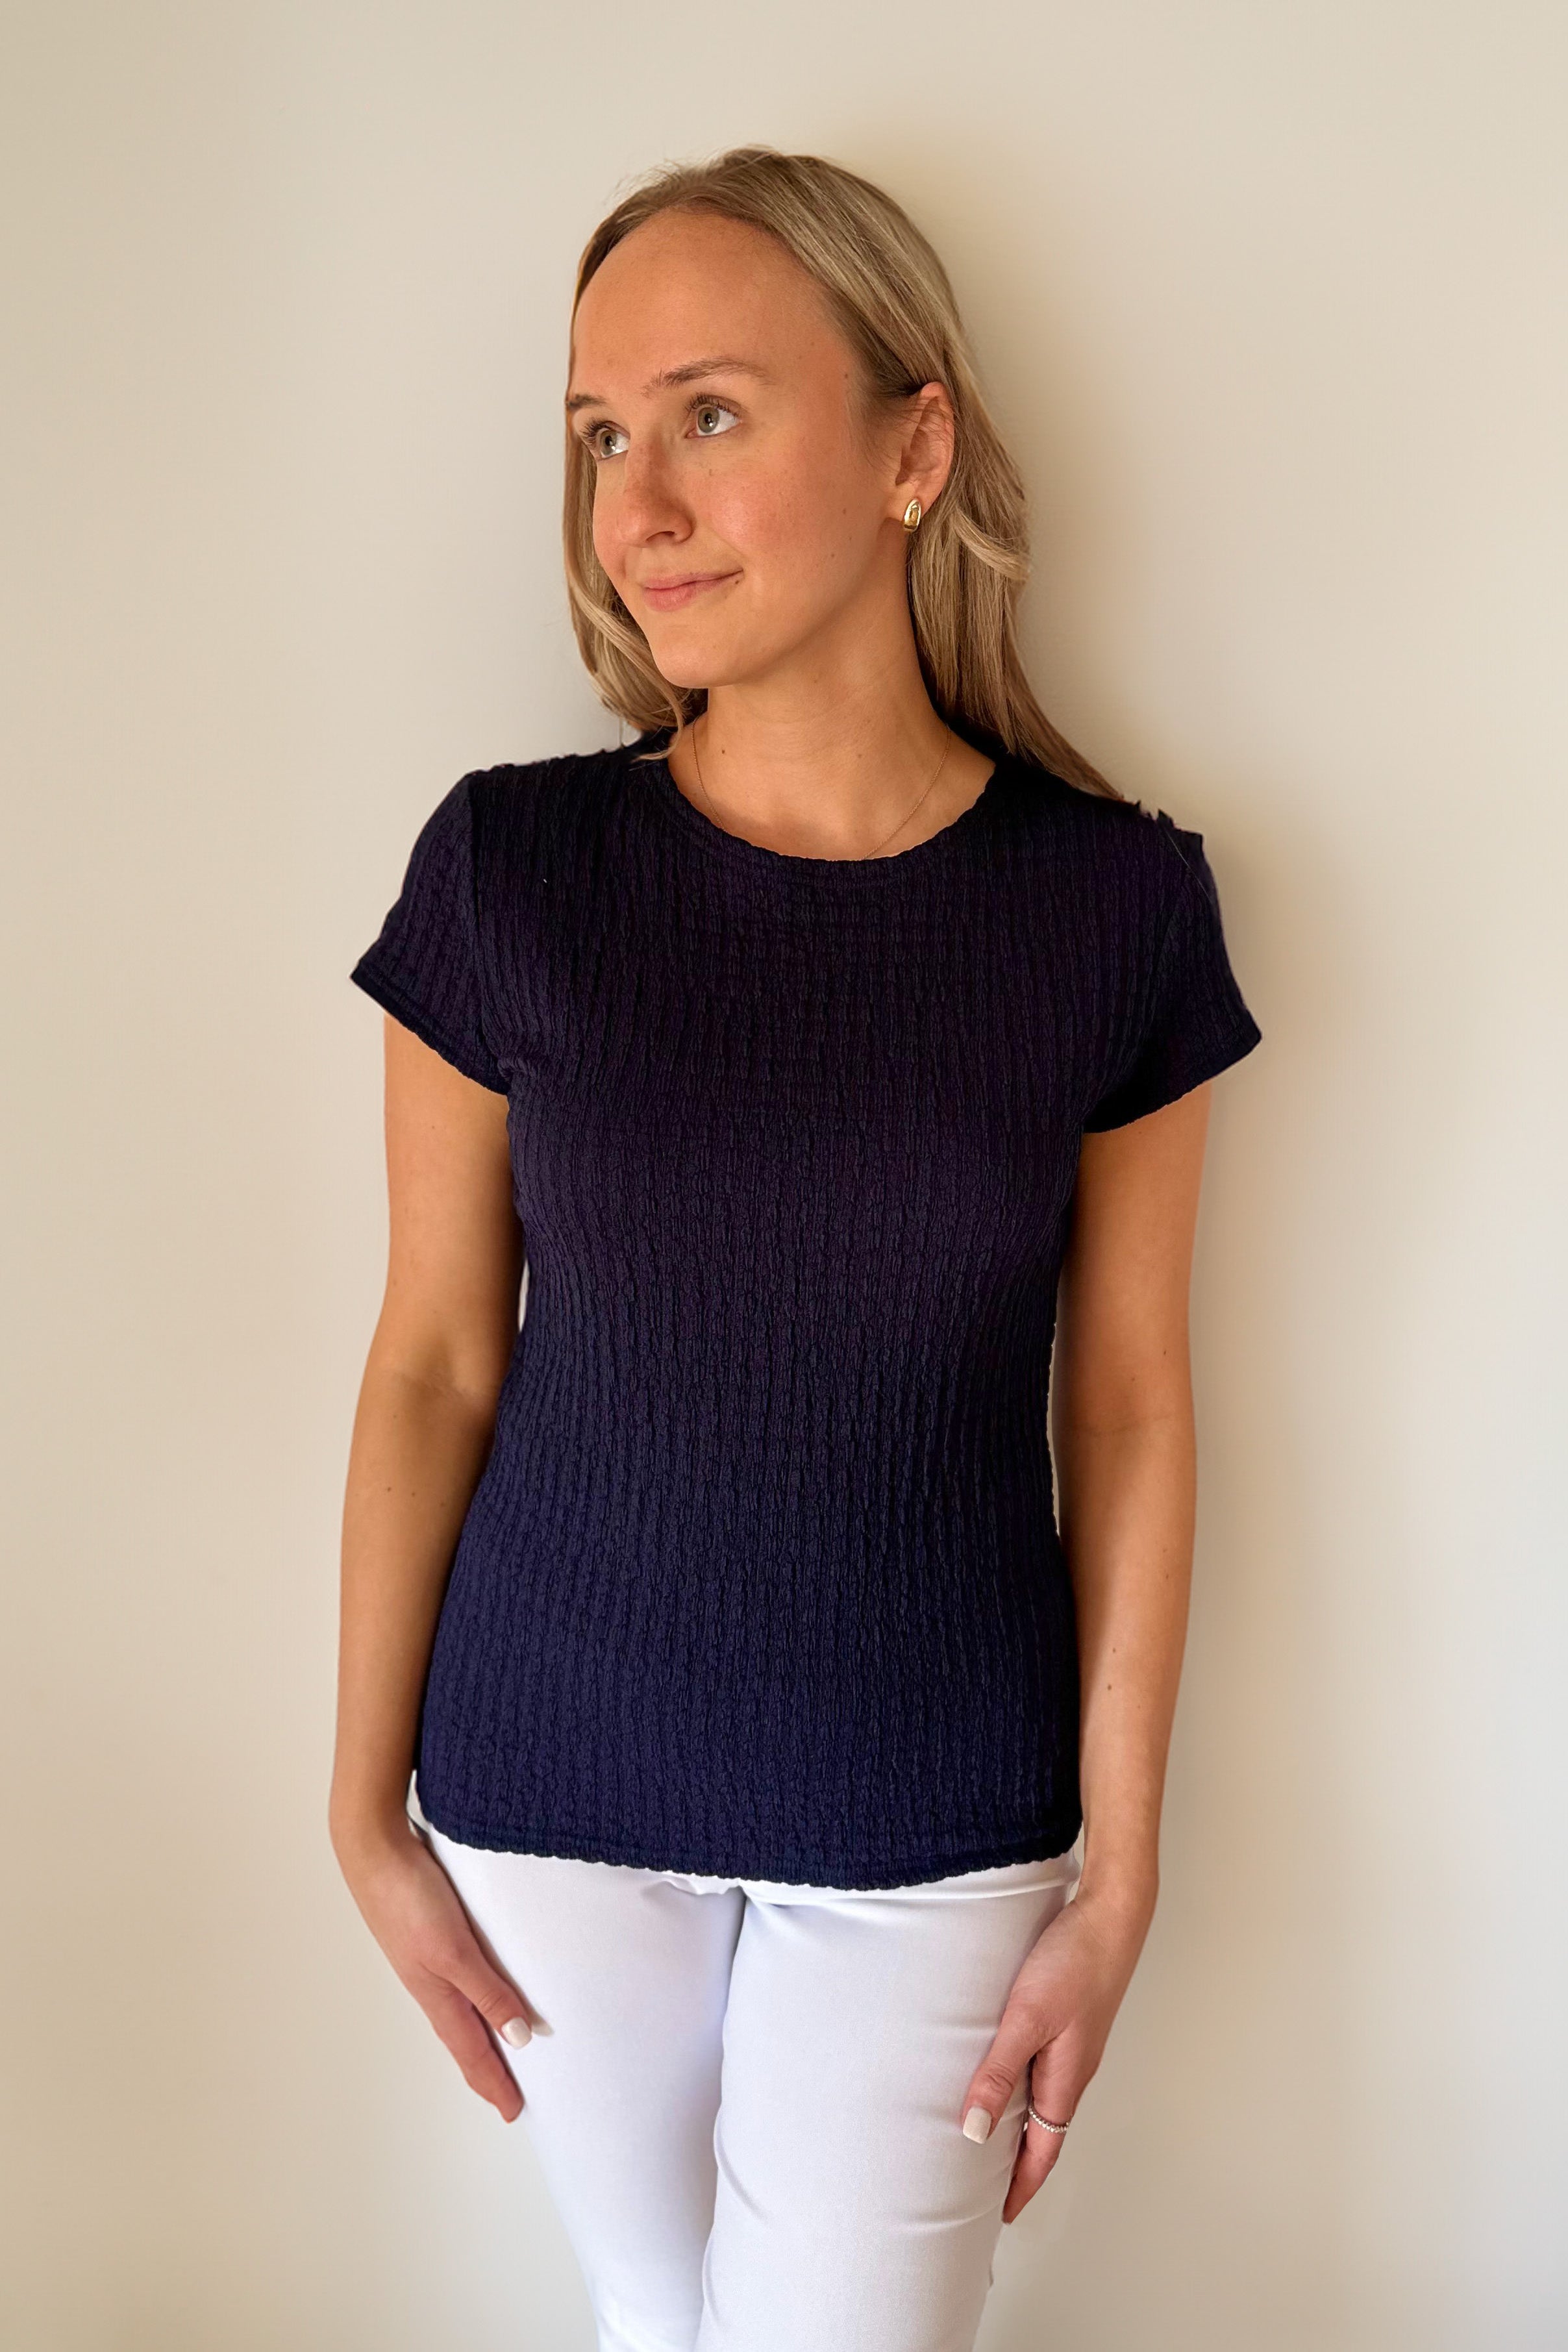 Woman in navy textured knit tee